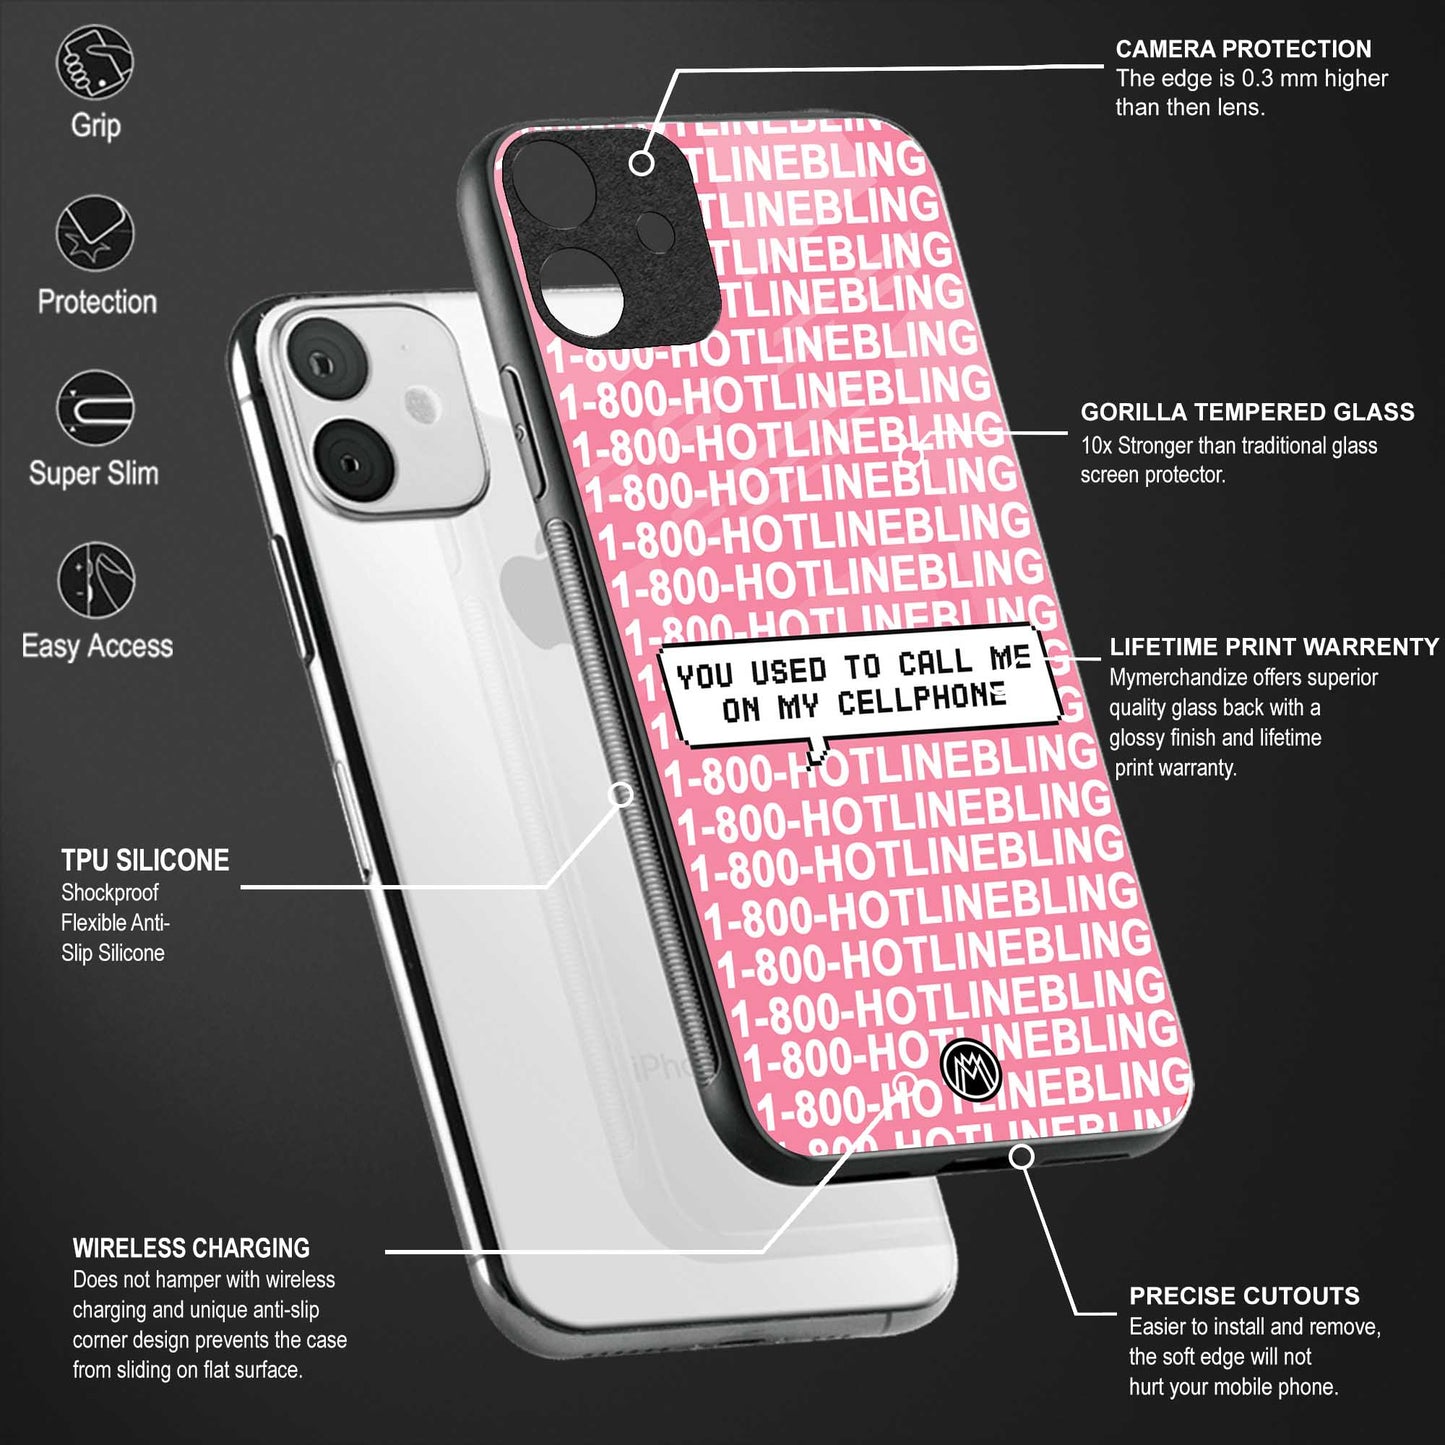 1800 hotline bling phone cover for samsung galaxy s21 plus 